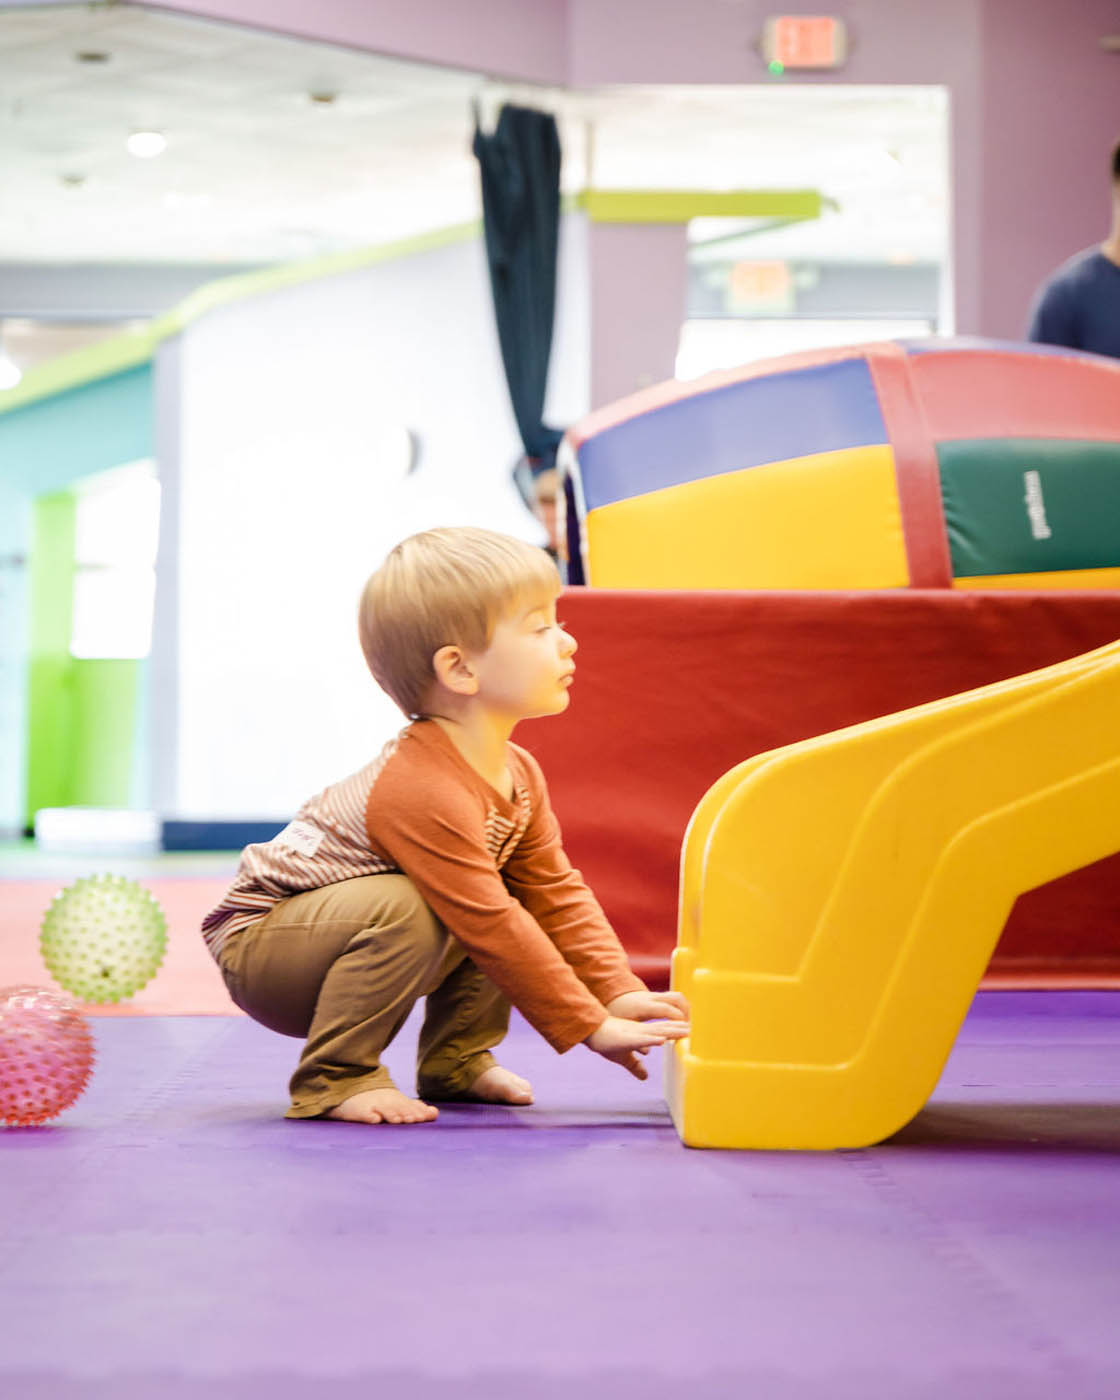 A young kid holding onto a yellow slide at Romp n' Roll - our kid-safe indoor playground franchise.